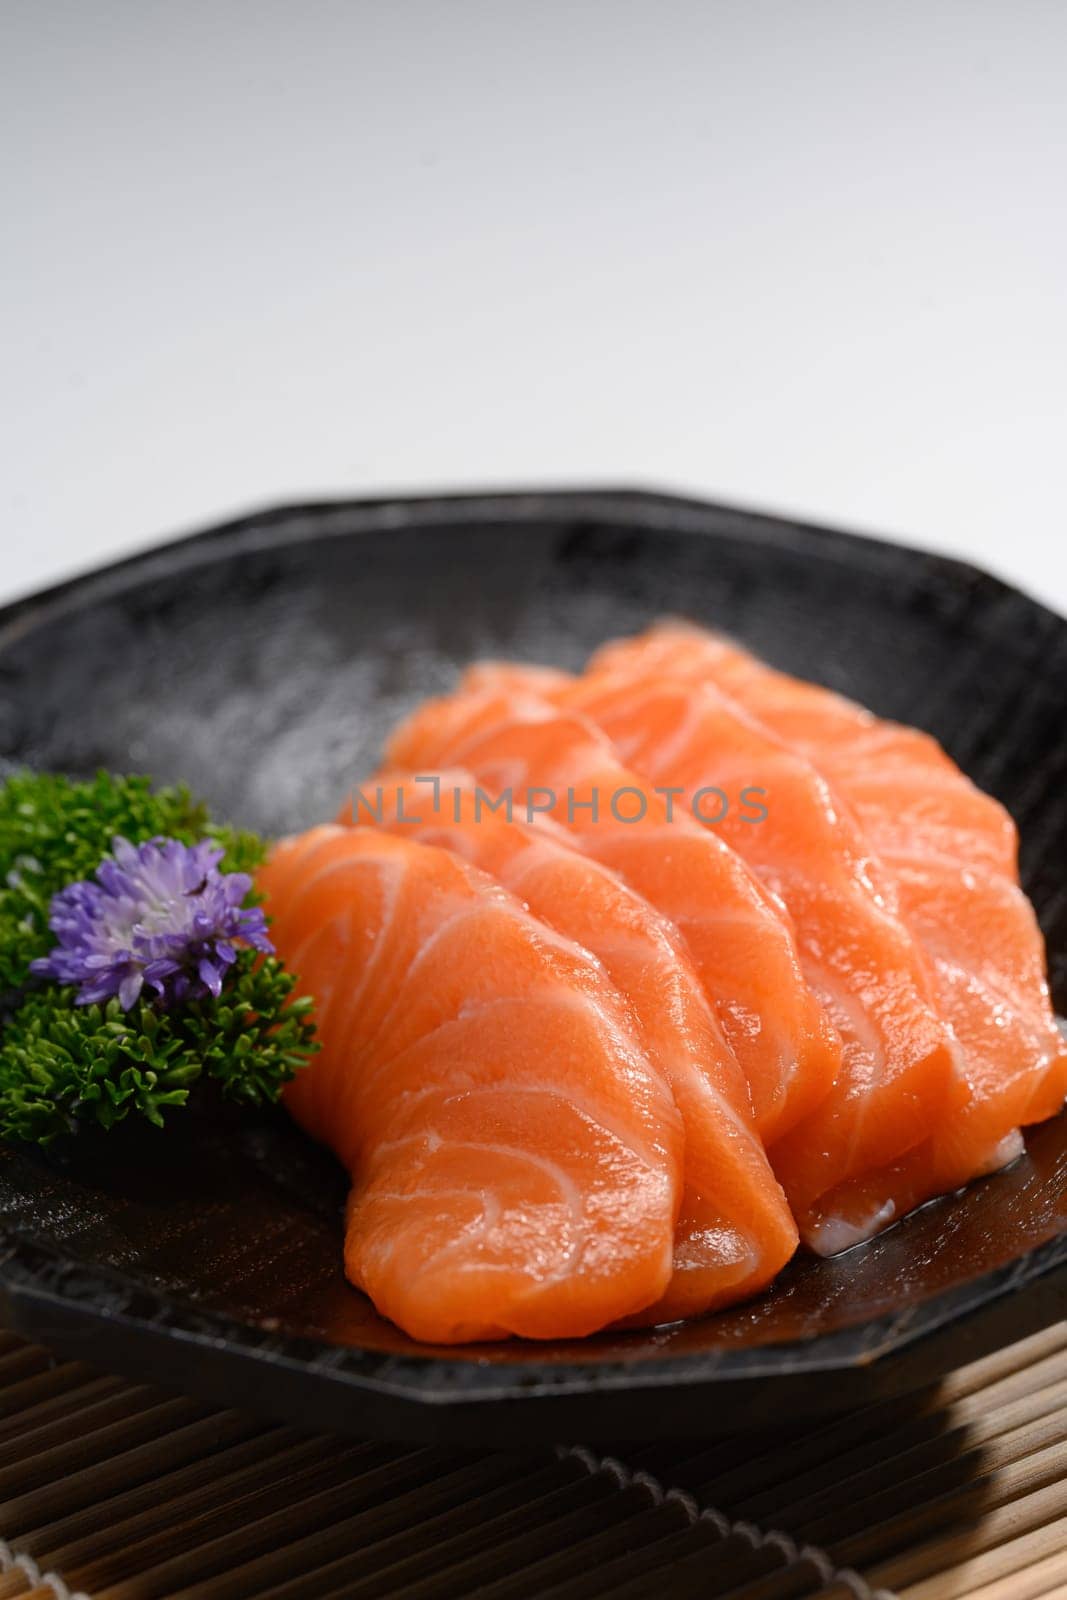 Sliced salmon with parsley leaf in black plate. Japanese food style by prathanchorruangsak